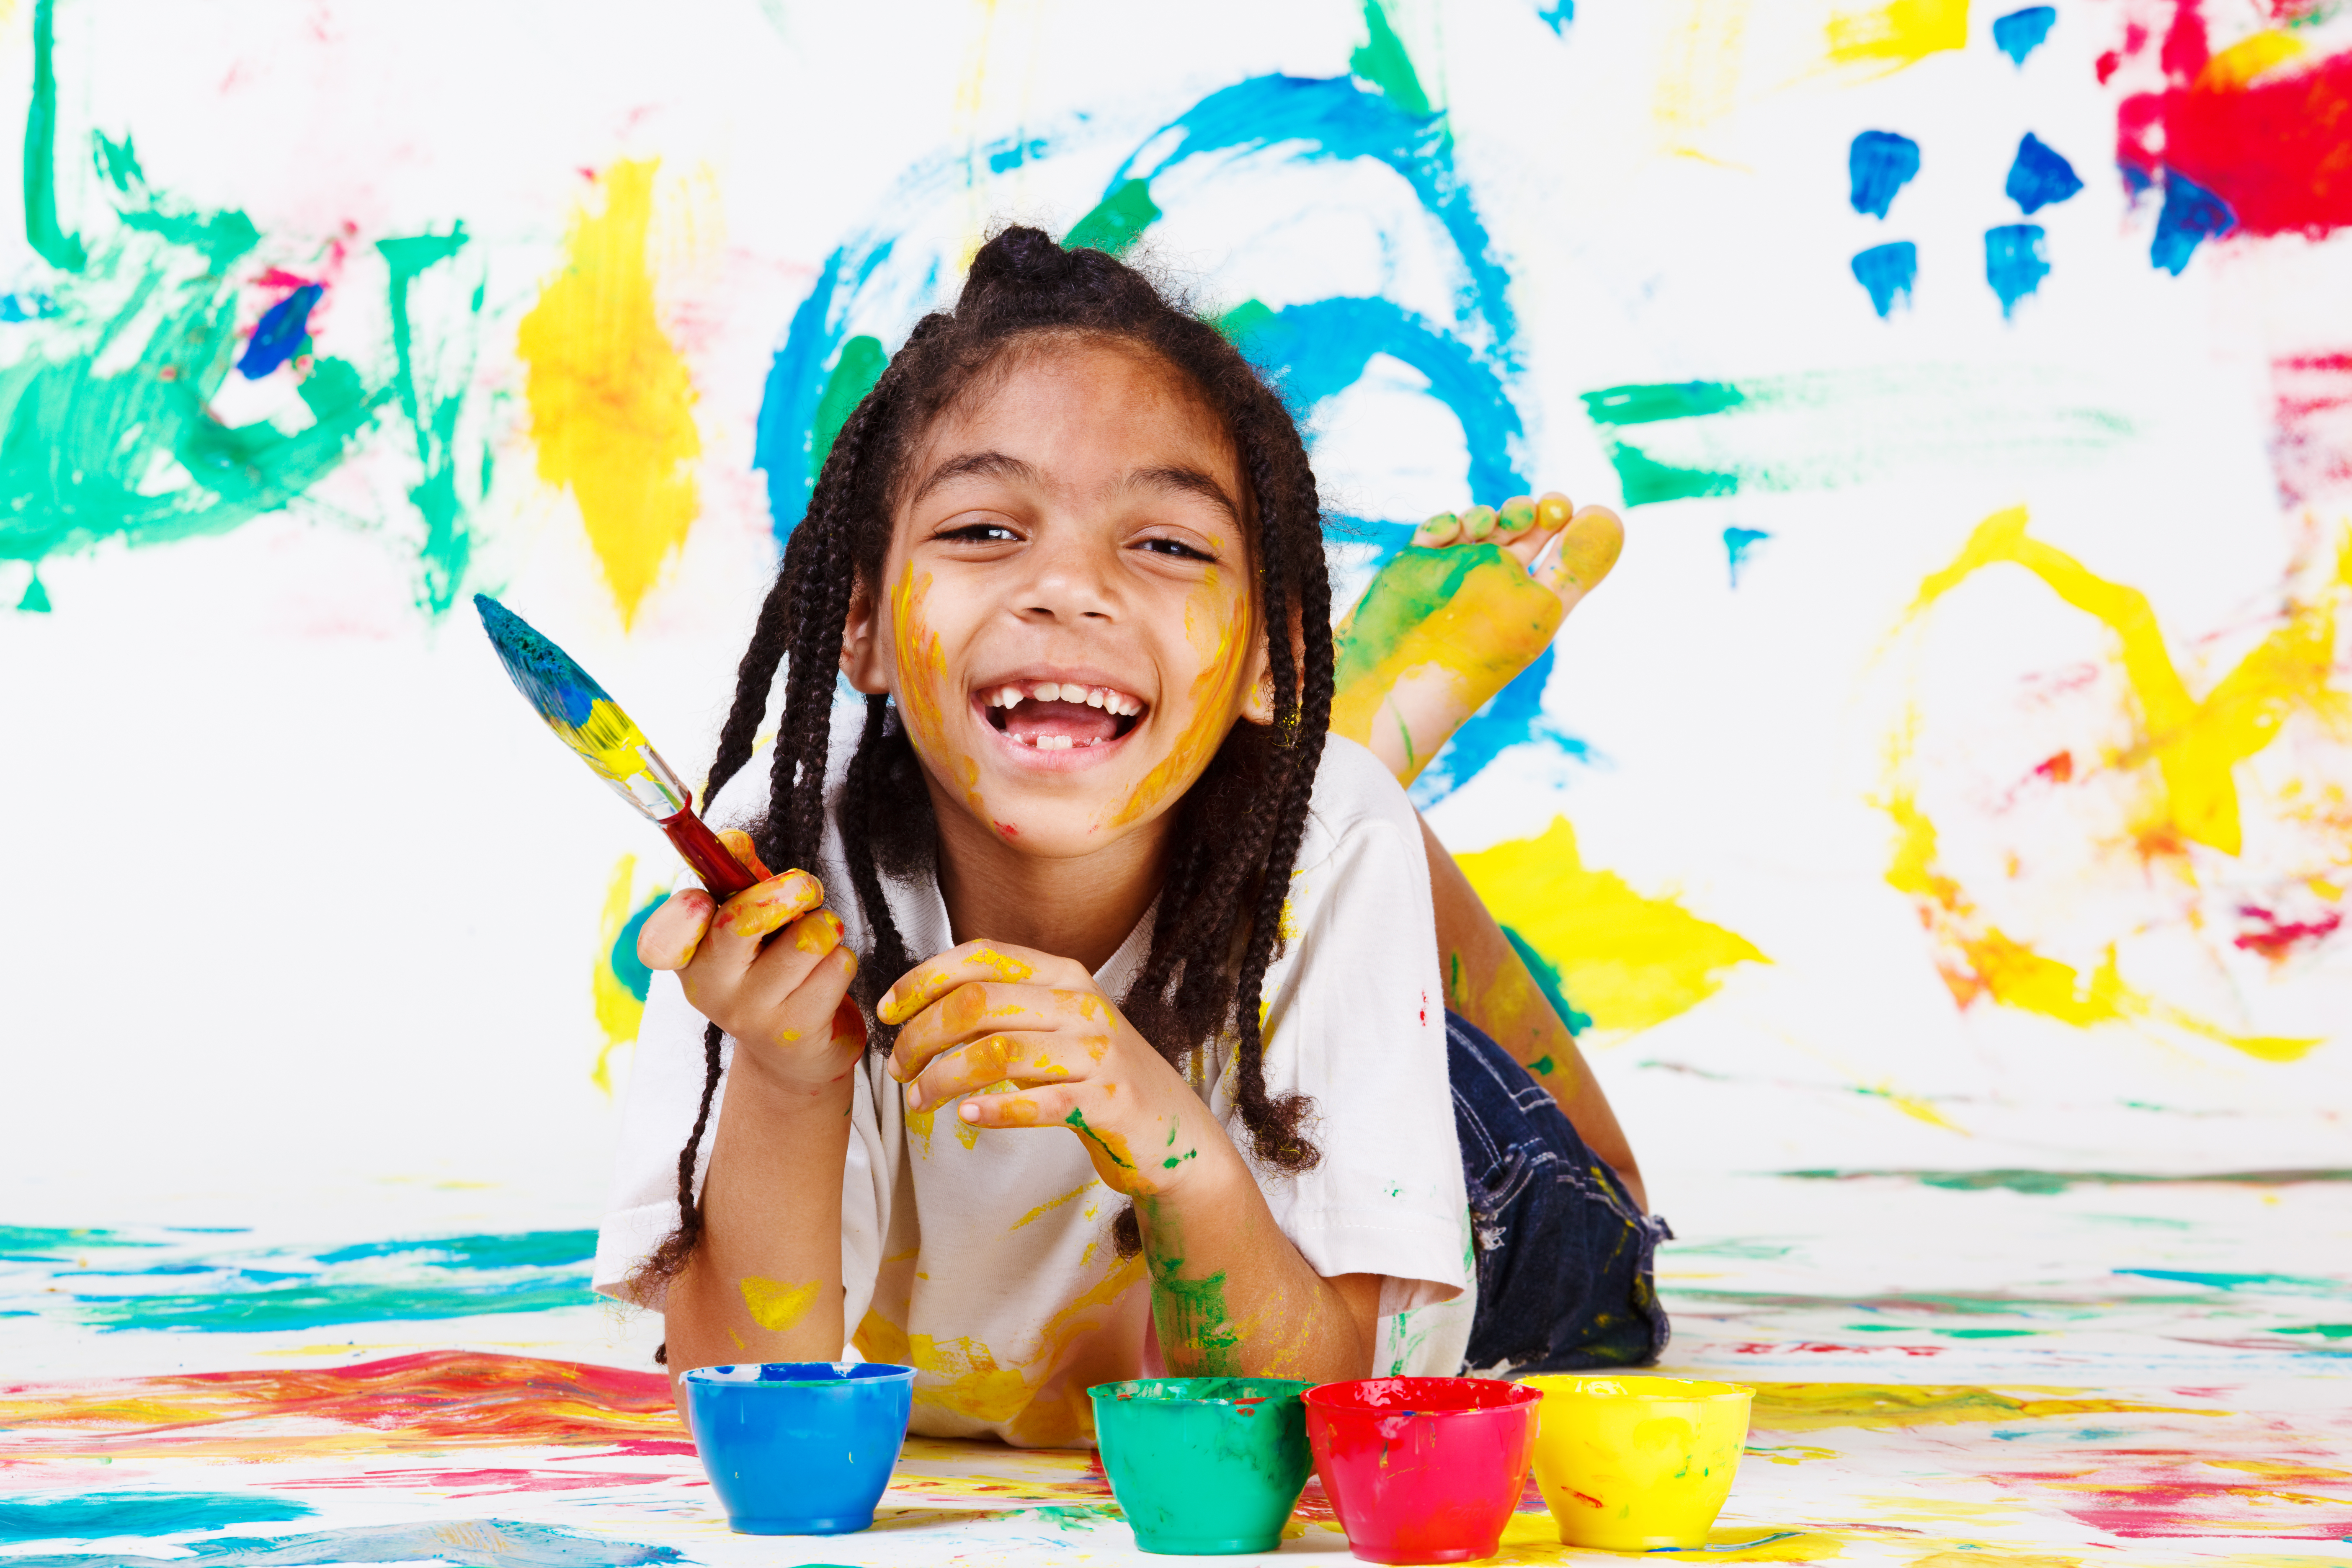 Five Ways to Make the Arts Part of Your Child’s Everyday Life